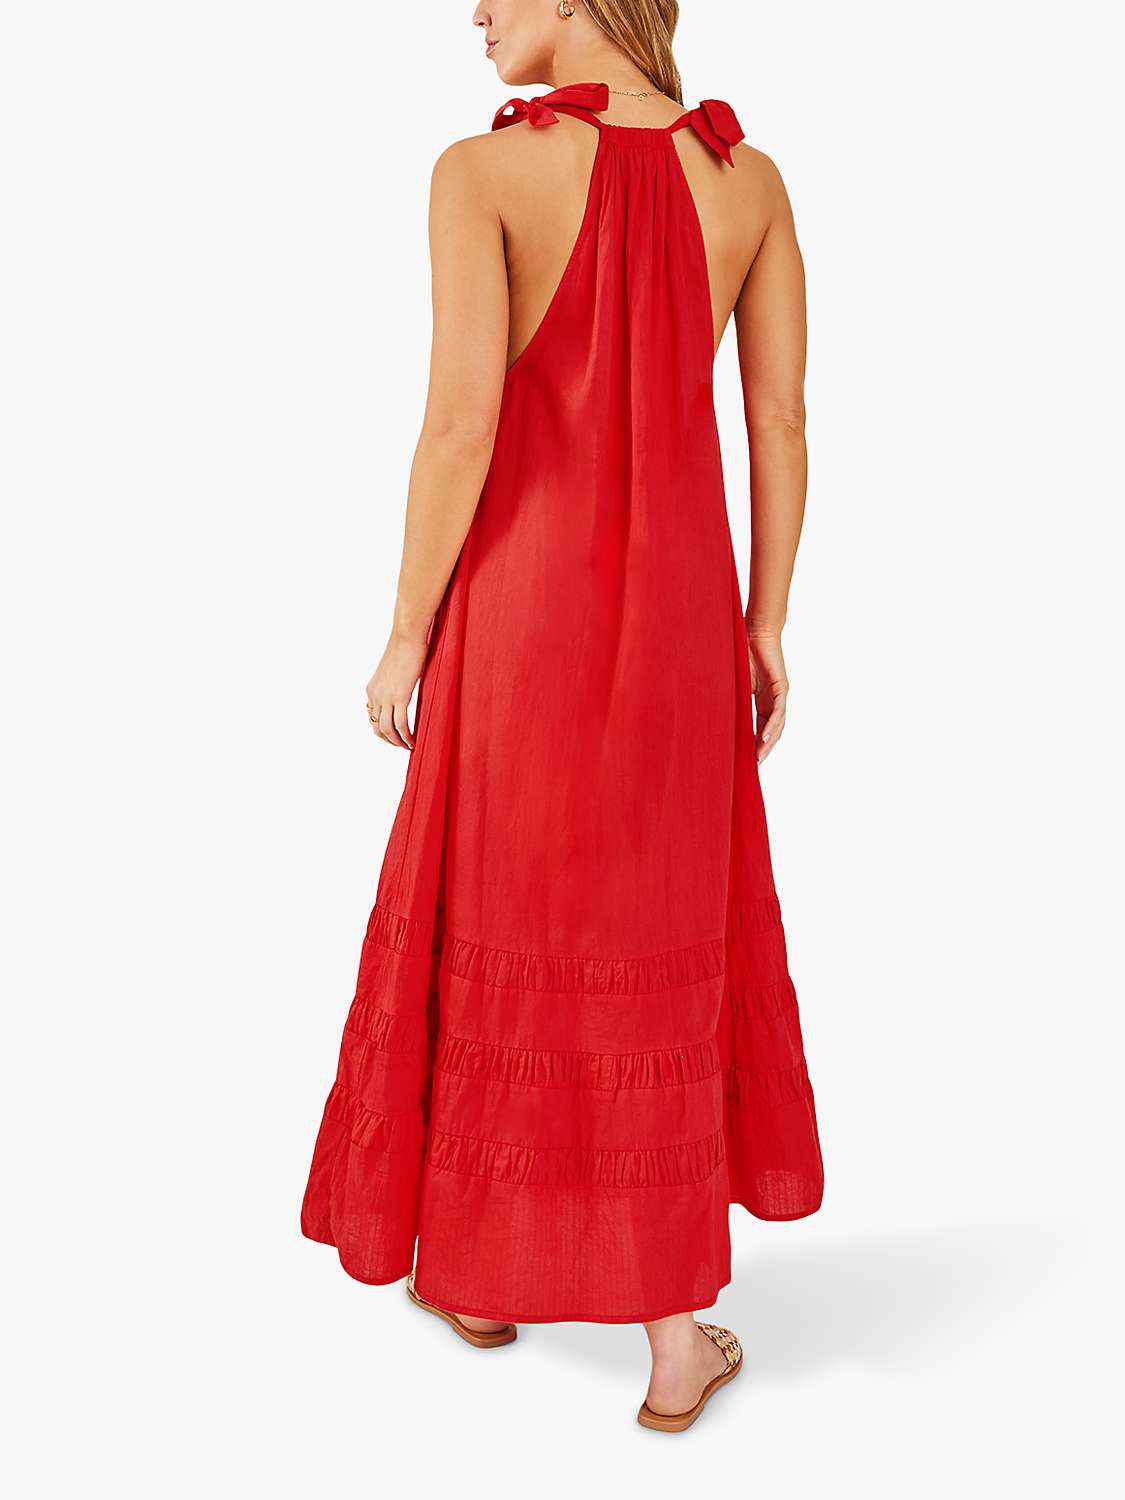 Buy Accessorize Ruched Hem Sleeveless Maxi Dress, Red Online at johnlewis.com